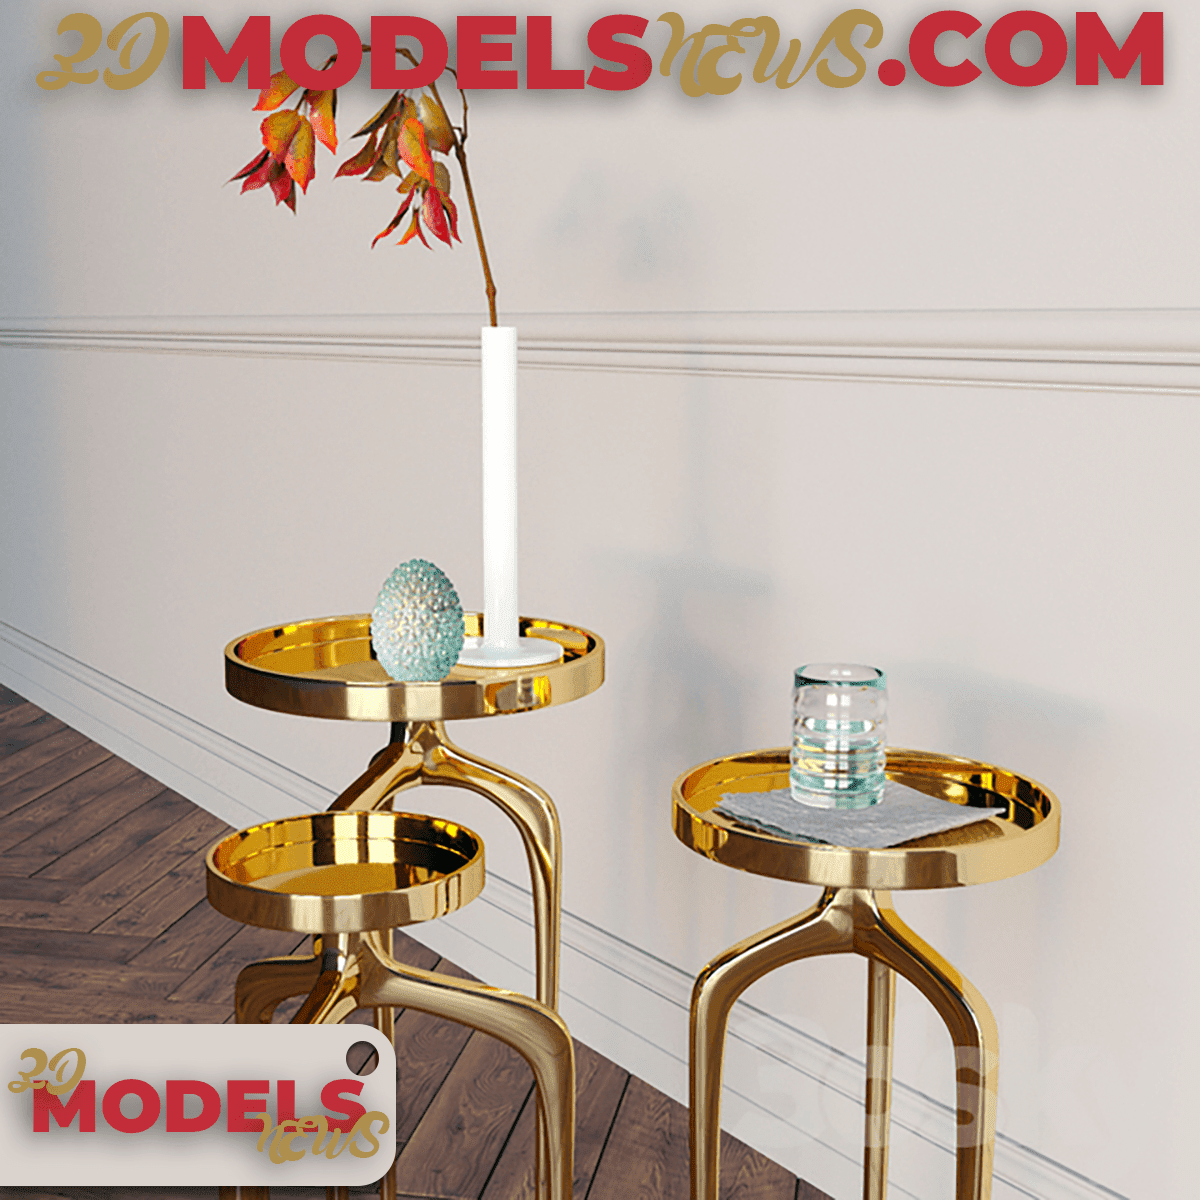 Galactic Side Tables Model 2